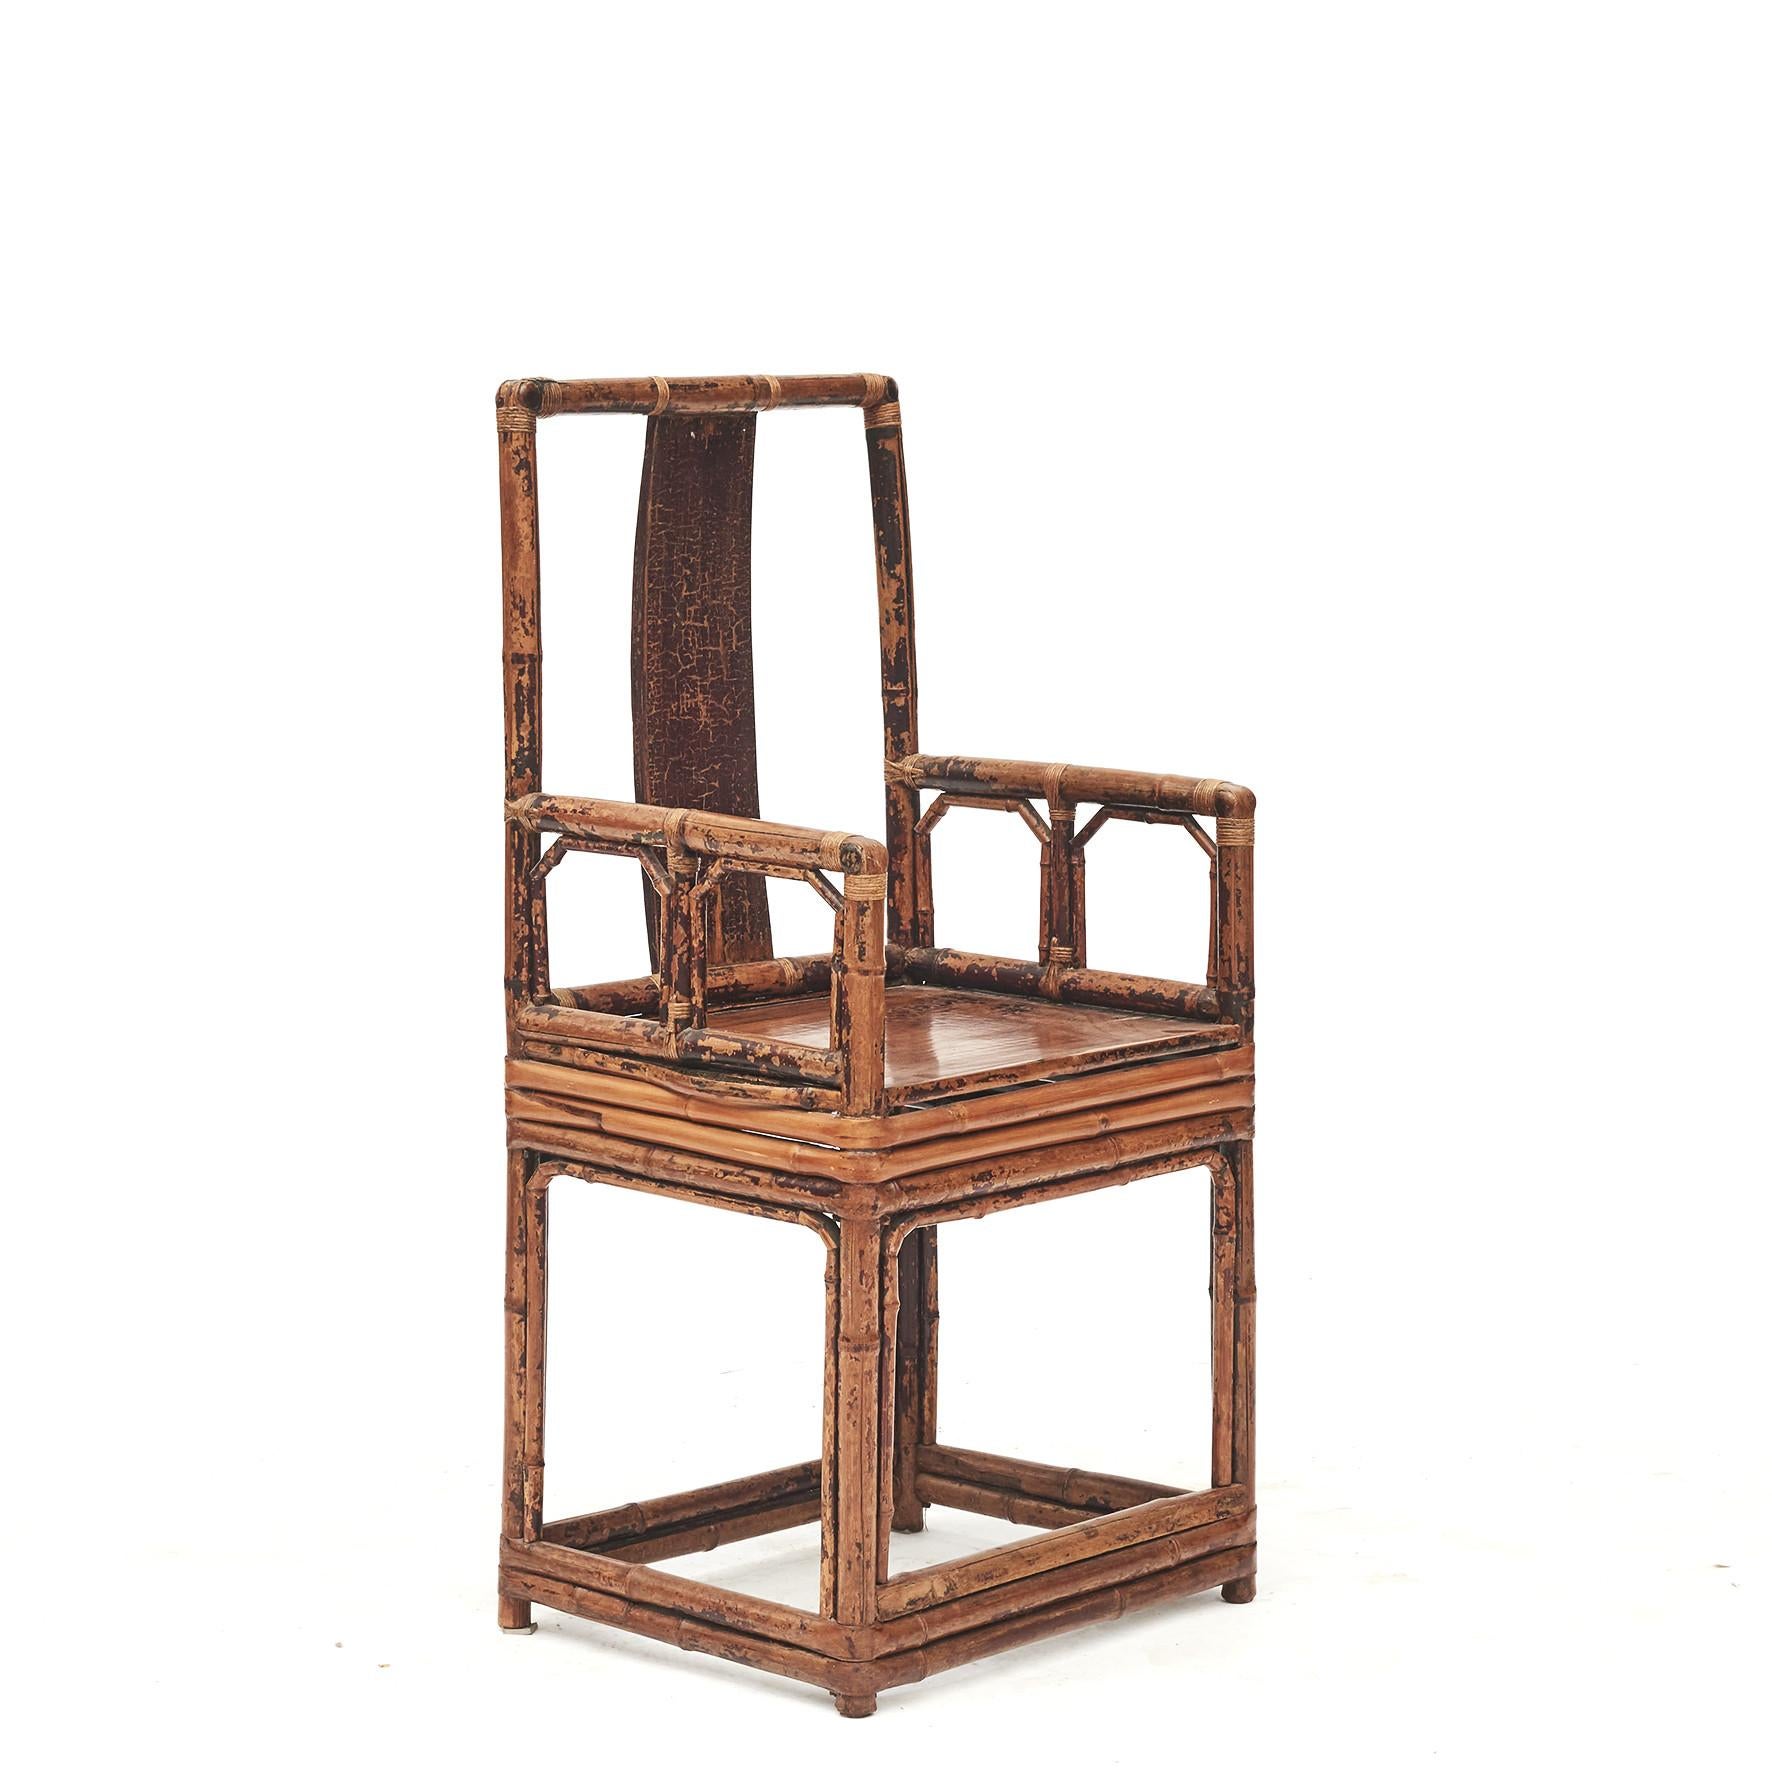 Pair of Chinese bamboo chairs each with wooden inset rectangular panel and seat.
Original condition with minor losses to the burgundy lacquer. Finished with a transparent lacquer which highlights the unique and natural patina.

From Jiangsu